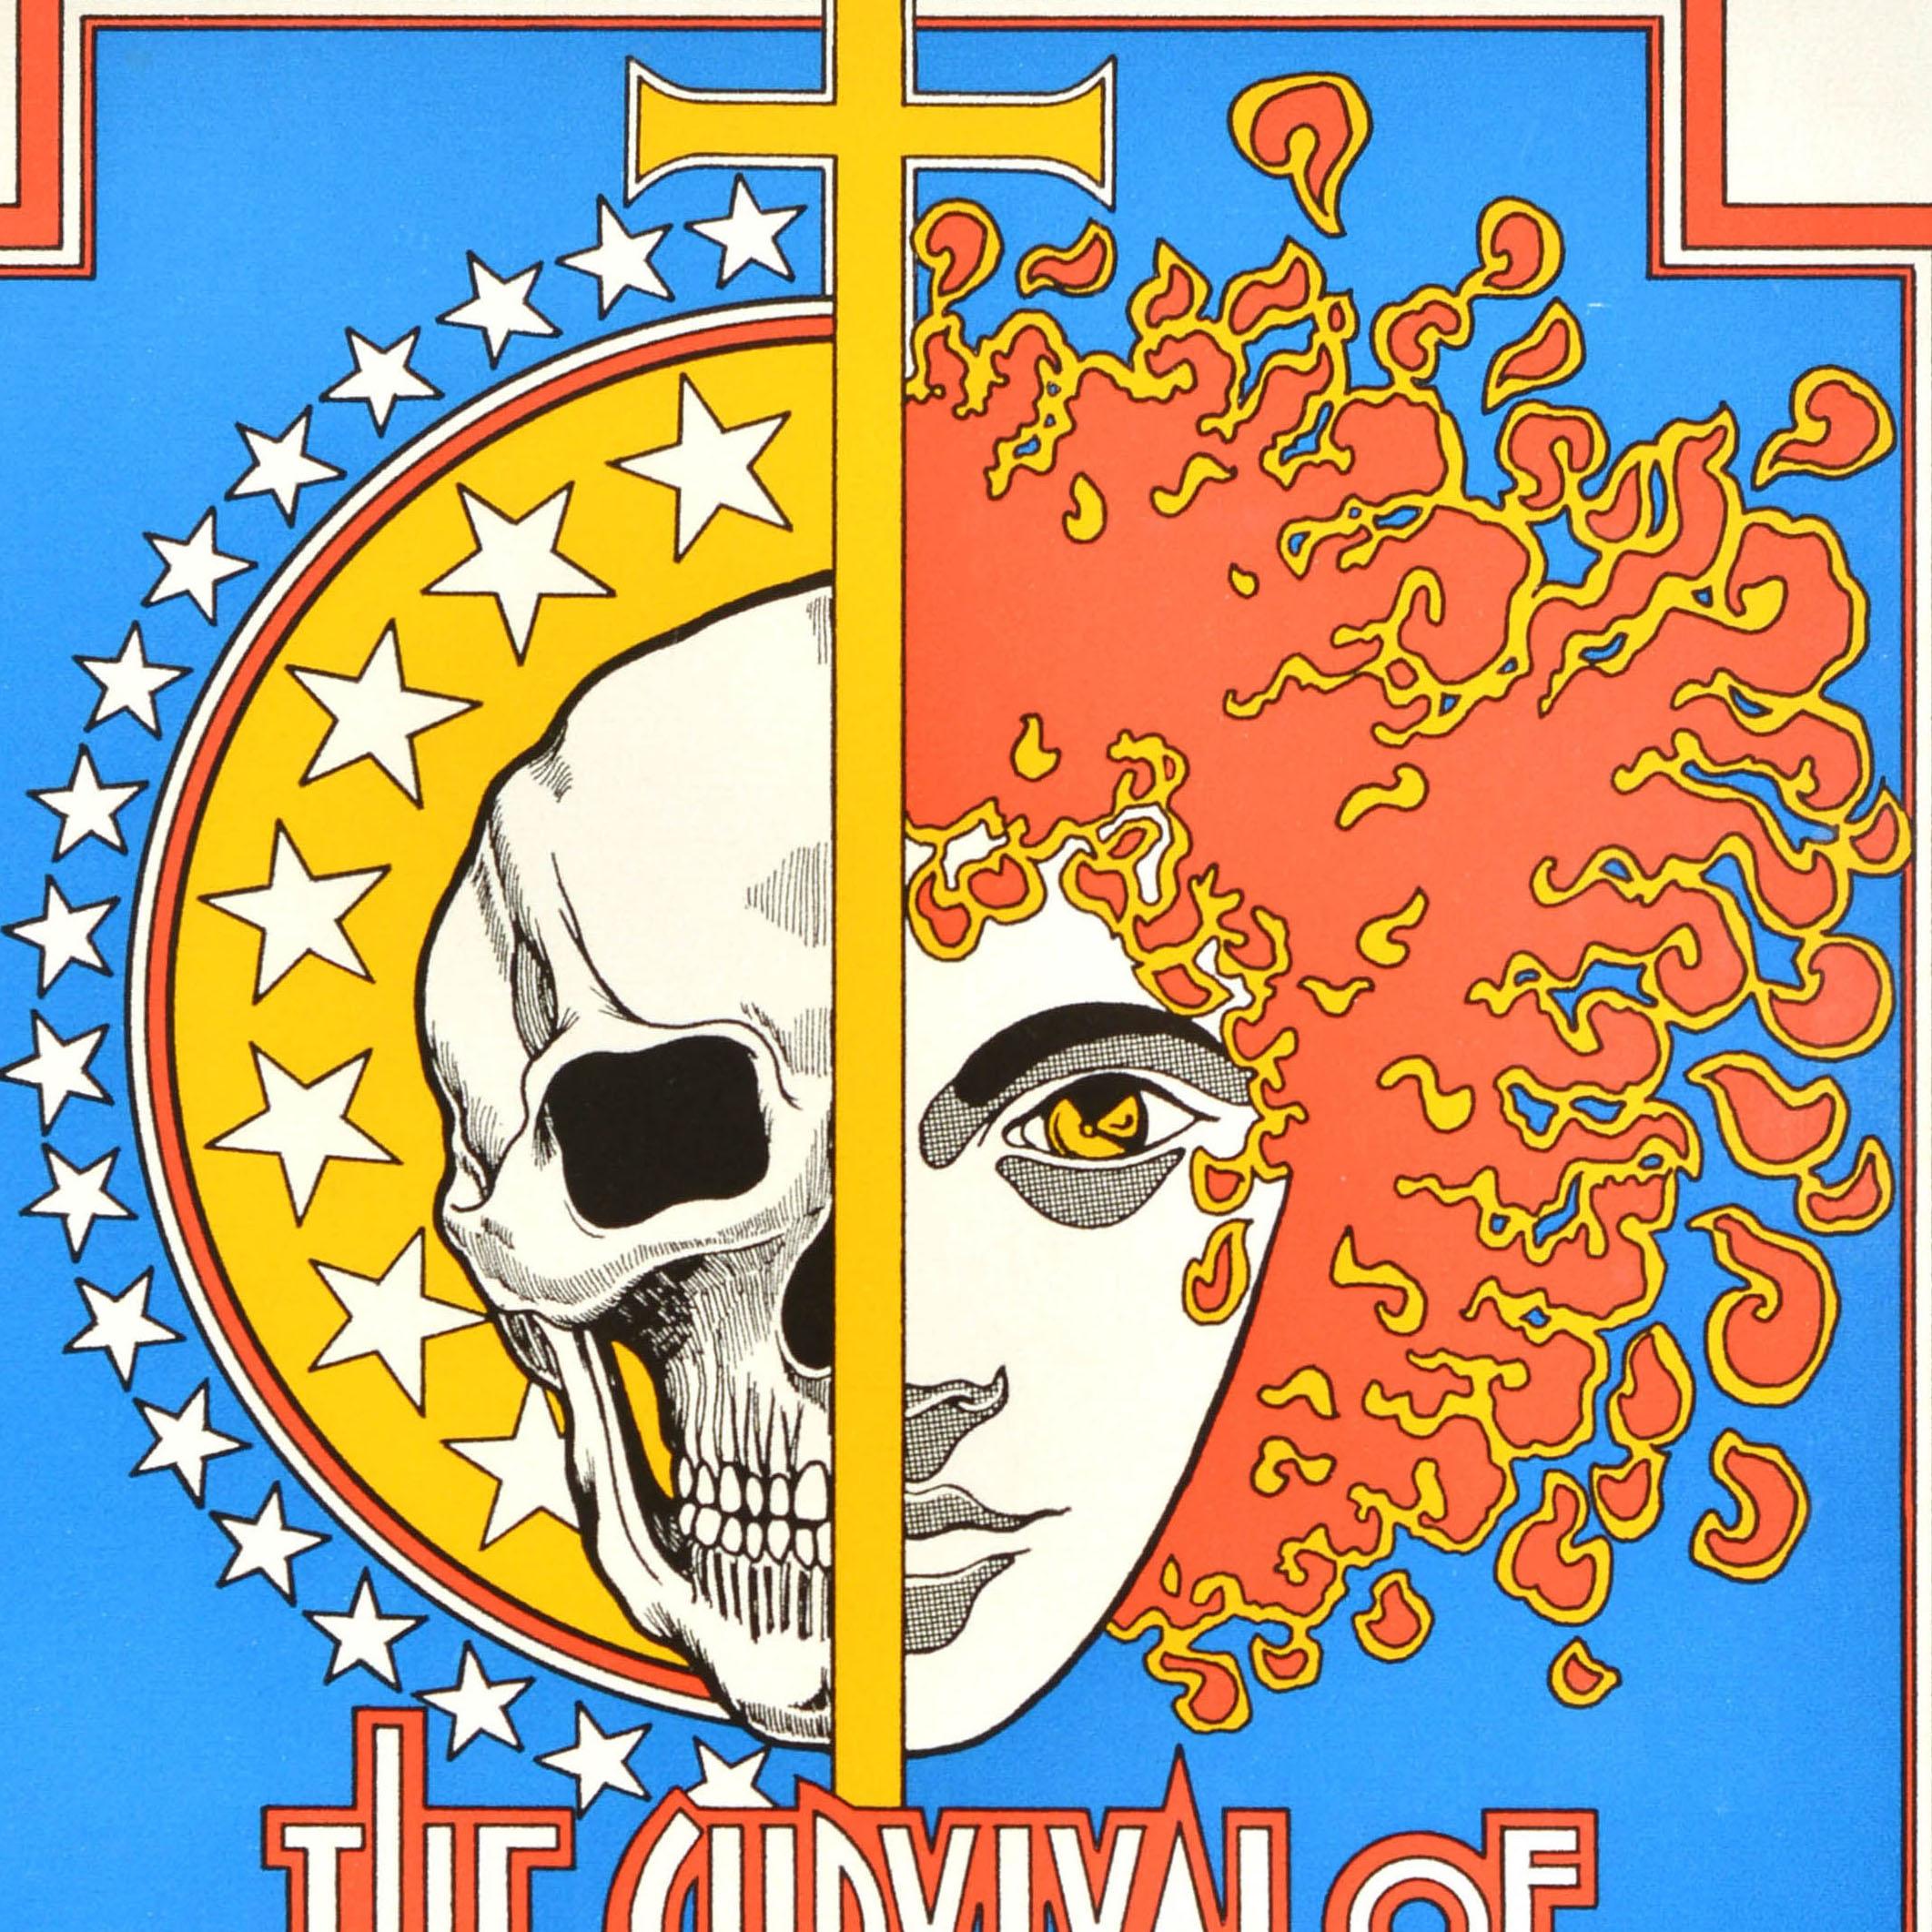 Original vintage musical advertising poster for The Survival of St. Joan Broadway A Medieval Rock Opera Anderson Theatre 66 Second Ave (at 4th St) by the American rock band Smoke Rise (Gary Ruffin, Hank Ruffin, Stan Ruffin, Randy Bugg; 1969-1972)